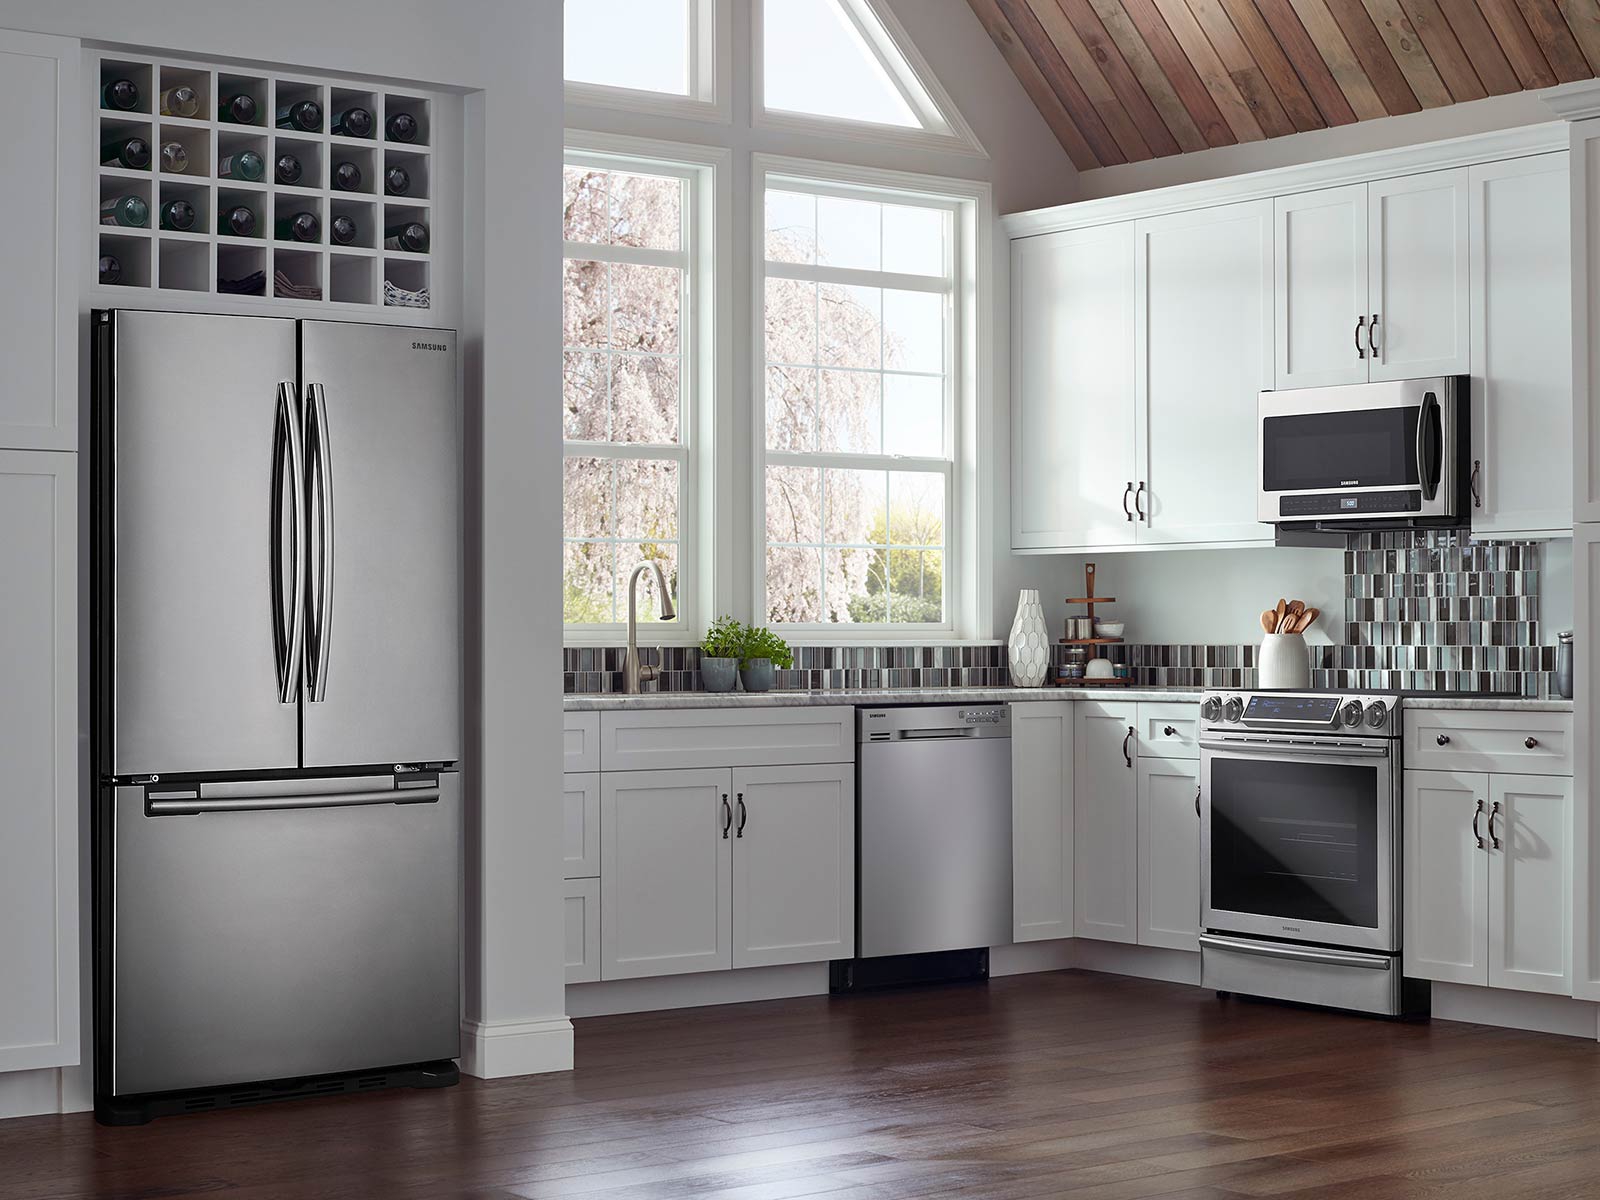 05 Refrigerator French Door RF18HFENBSR Lifestyle Kitchen Closed Silver ?$product Details Jpg$